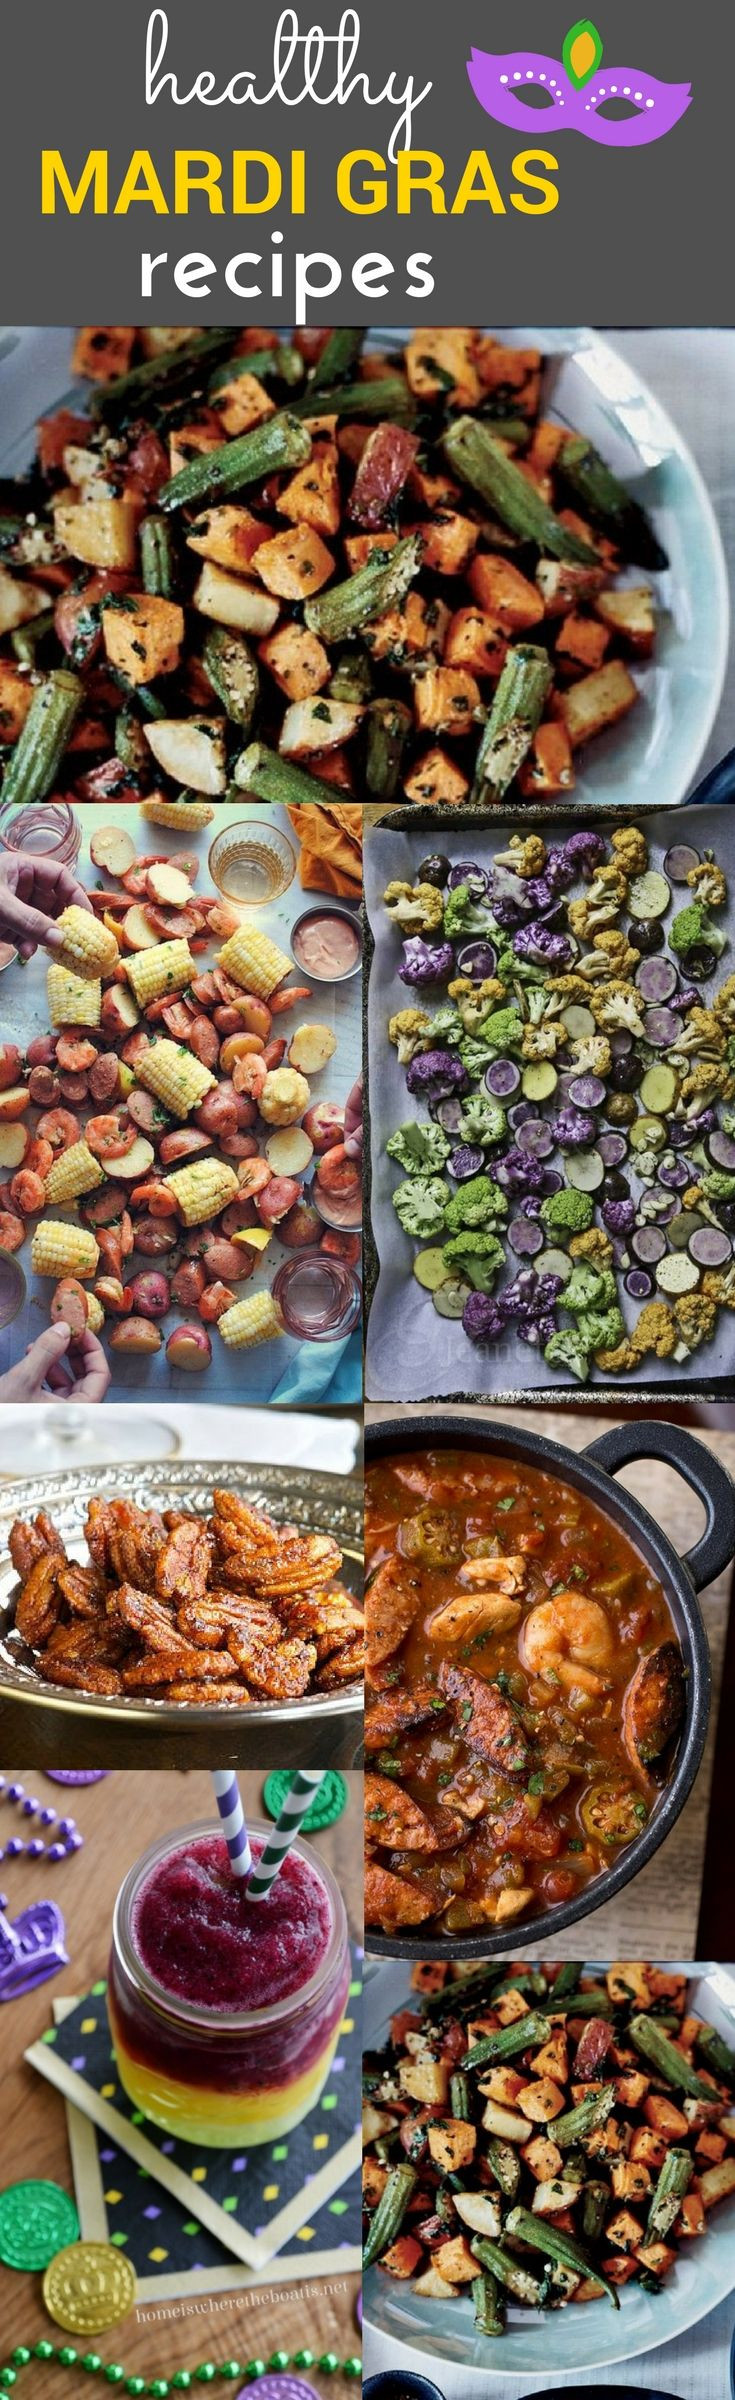 Mardi Gras Side Dishes
 New Orleans Inspired Healthy Mardi Gras Recipes